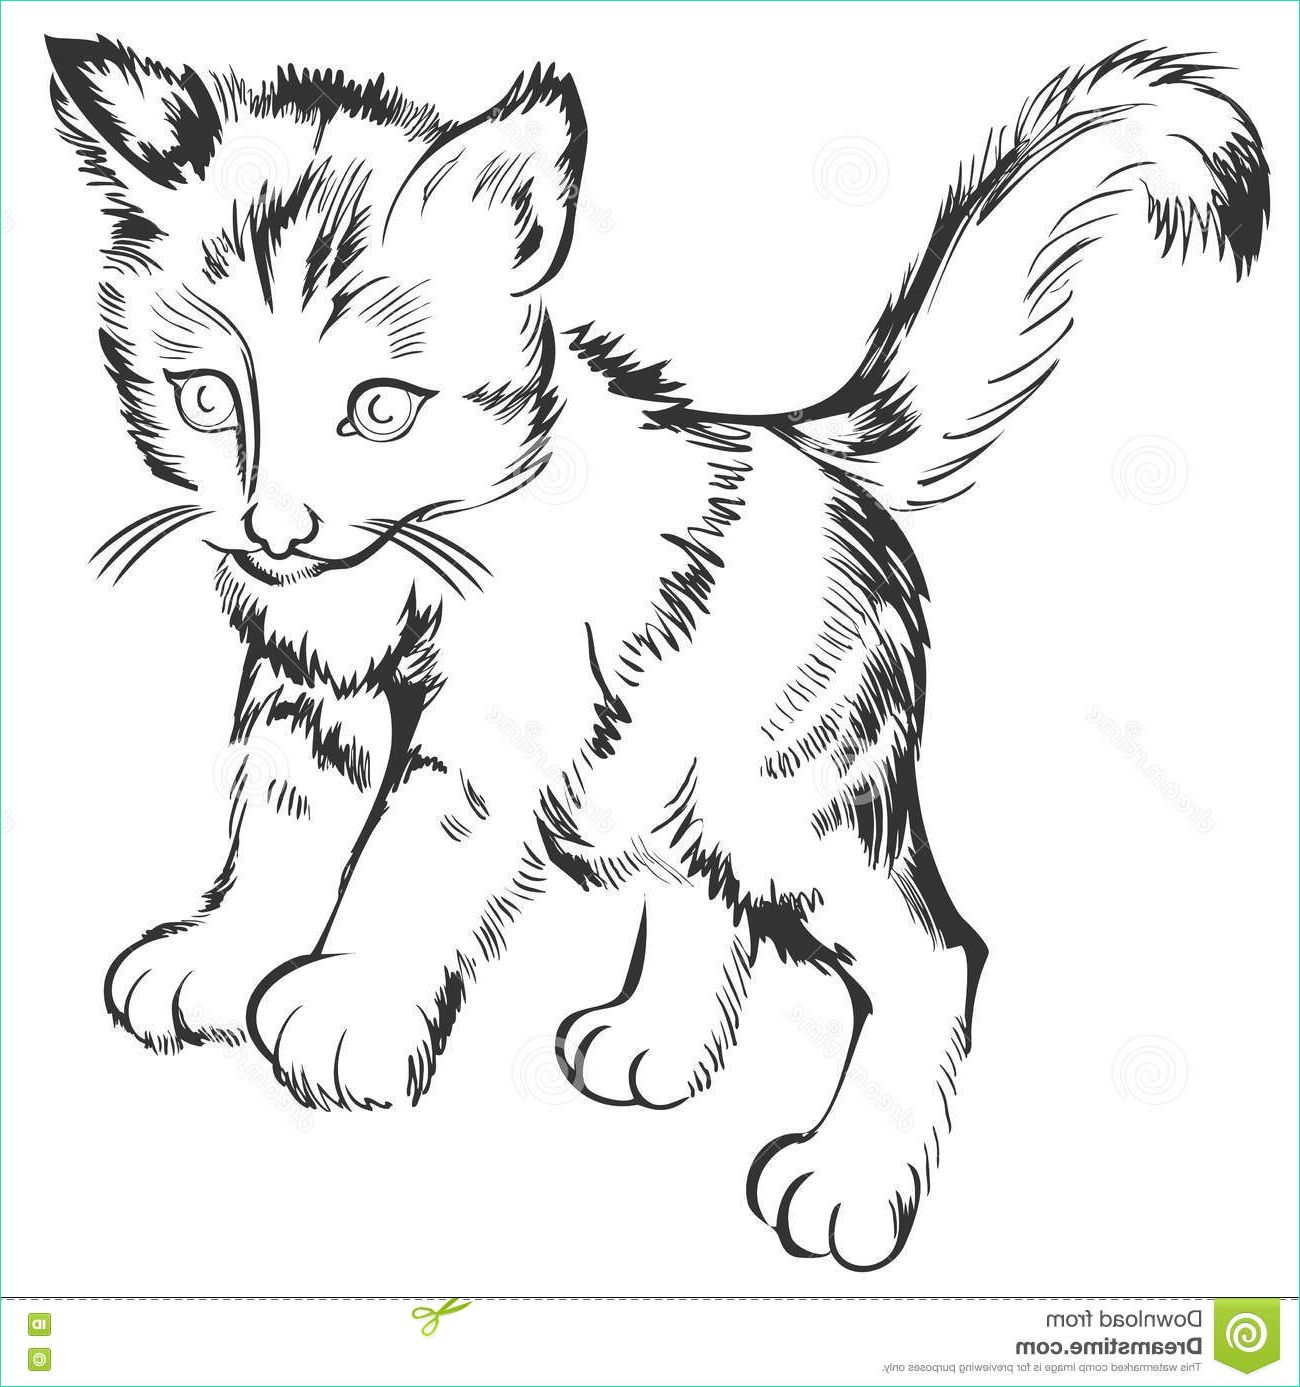 stock illustration black white sketch little kitten drawing made puter graphic tablet vector image scale to any size loss image